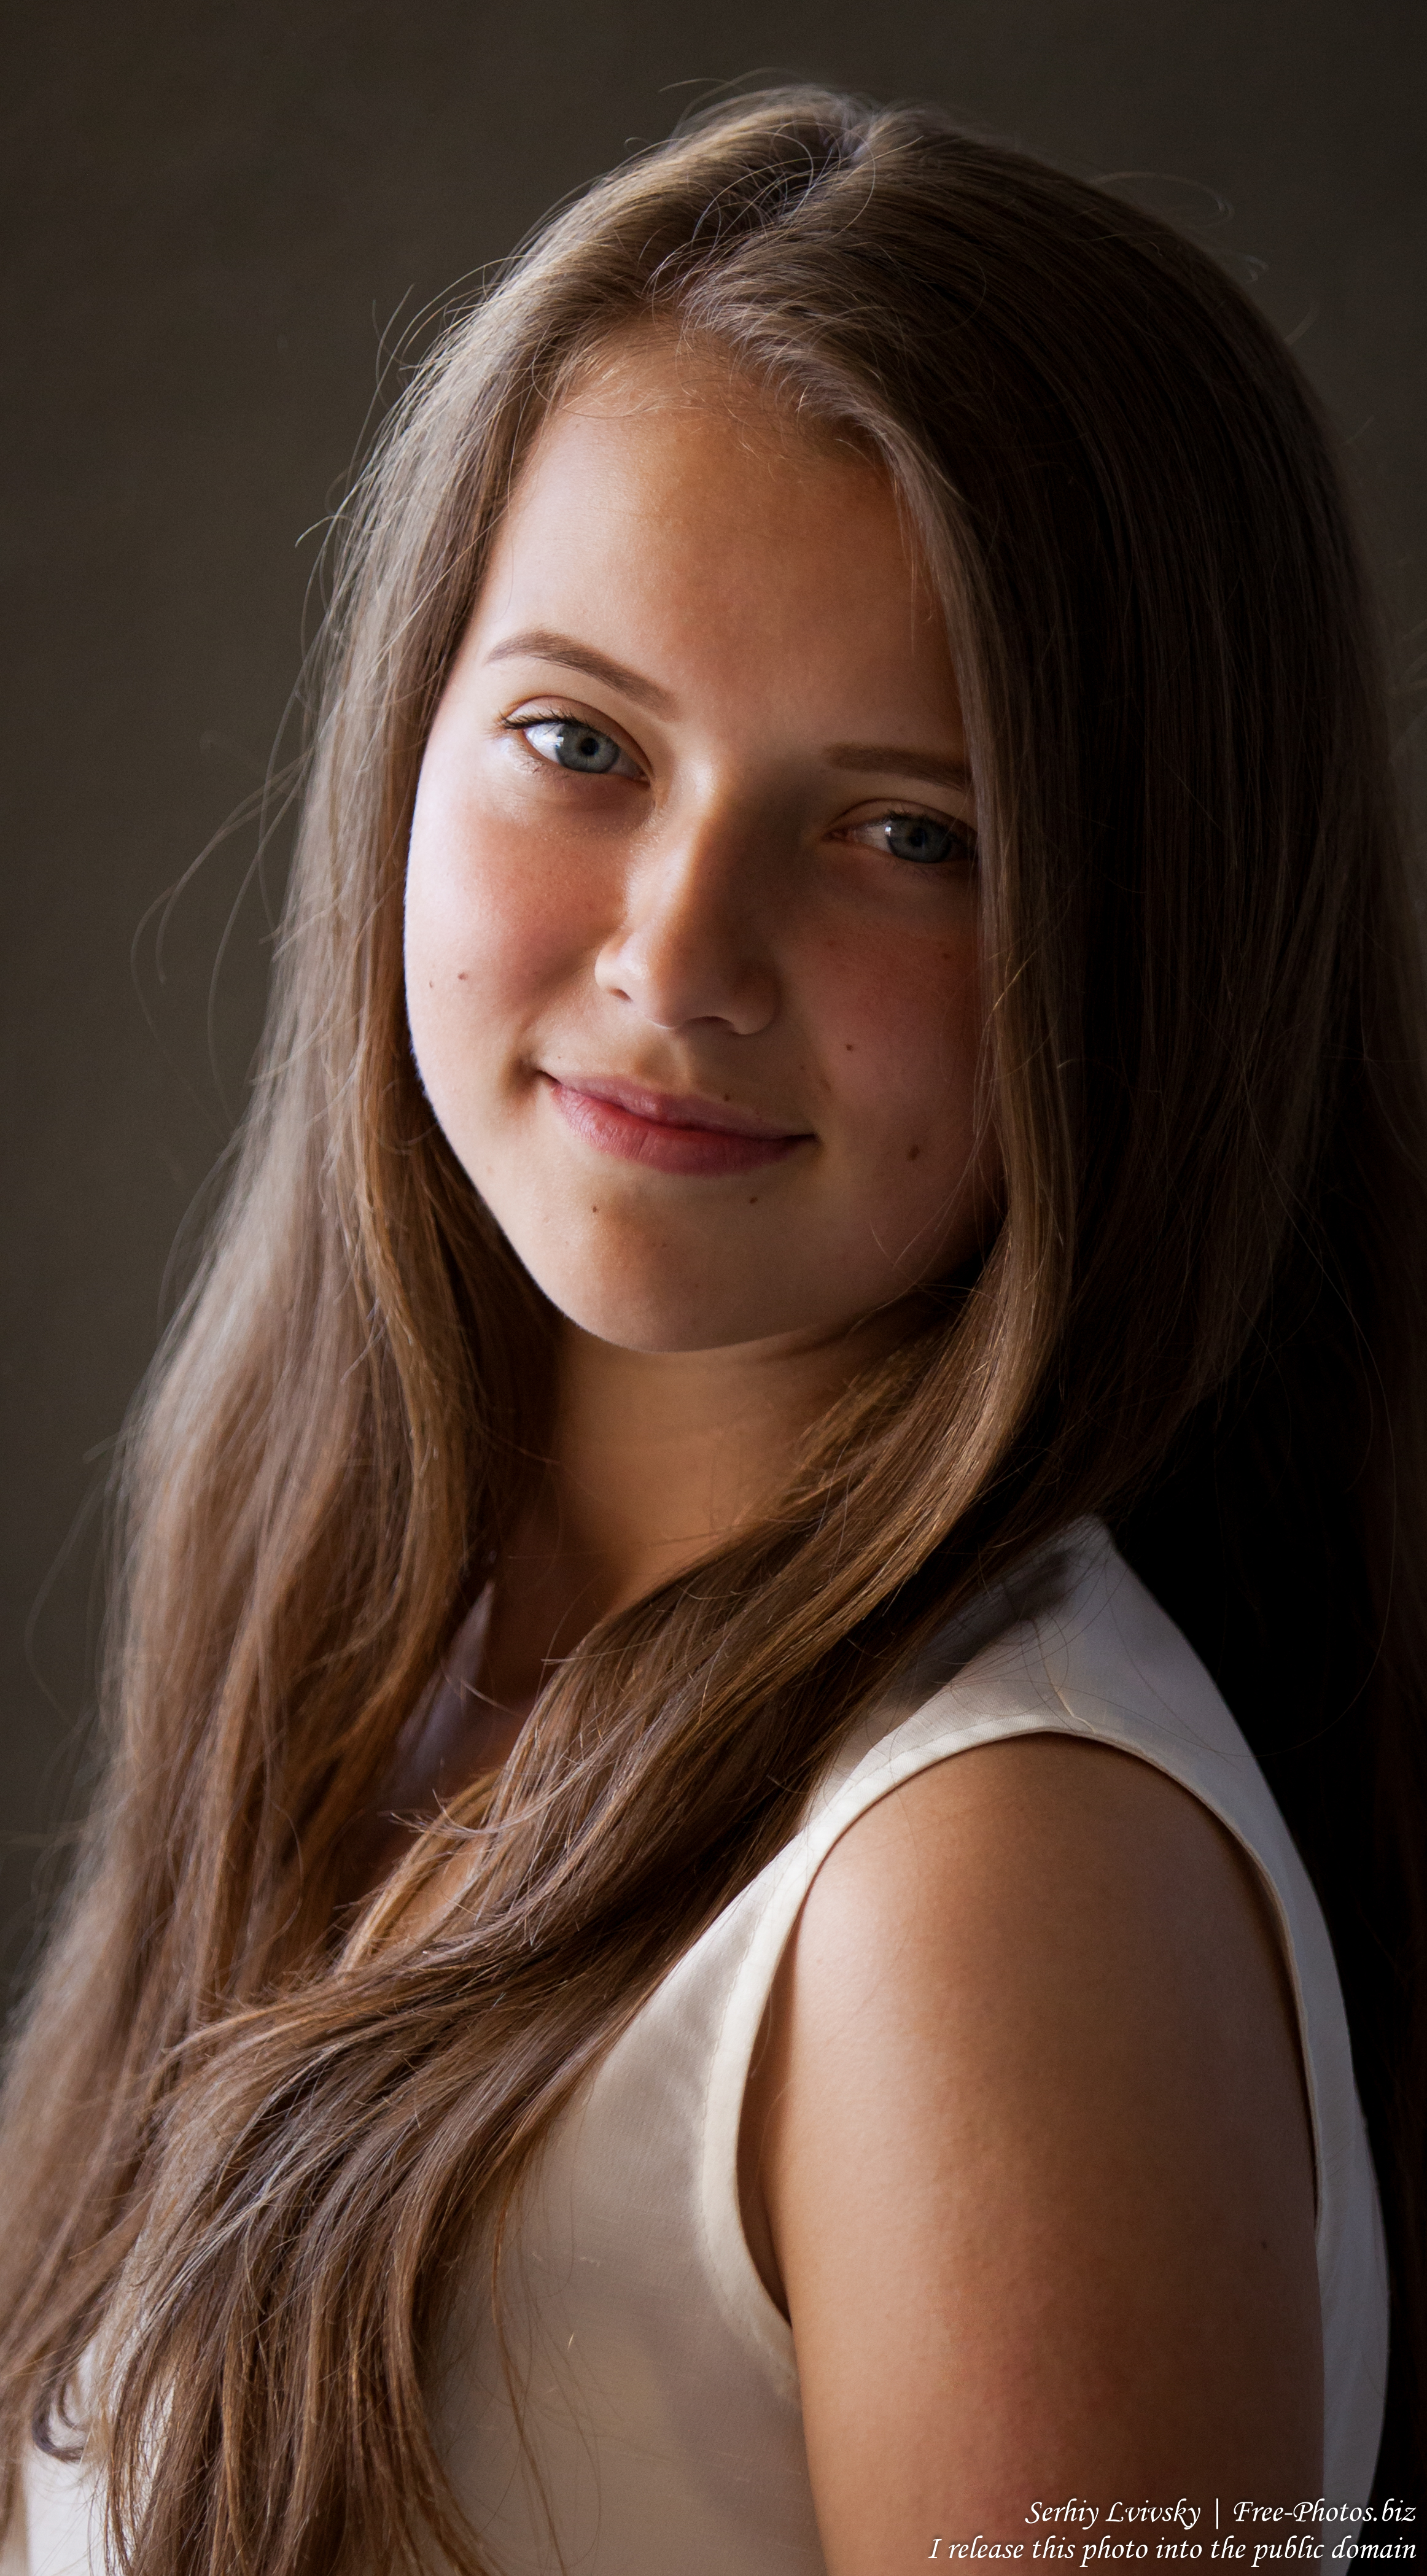 Photo of a cute 15-year old girl photographed in July 2015, 